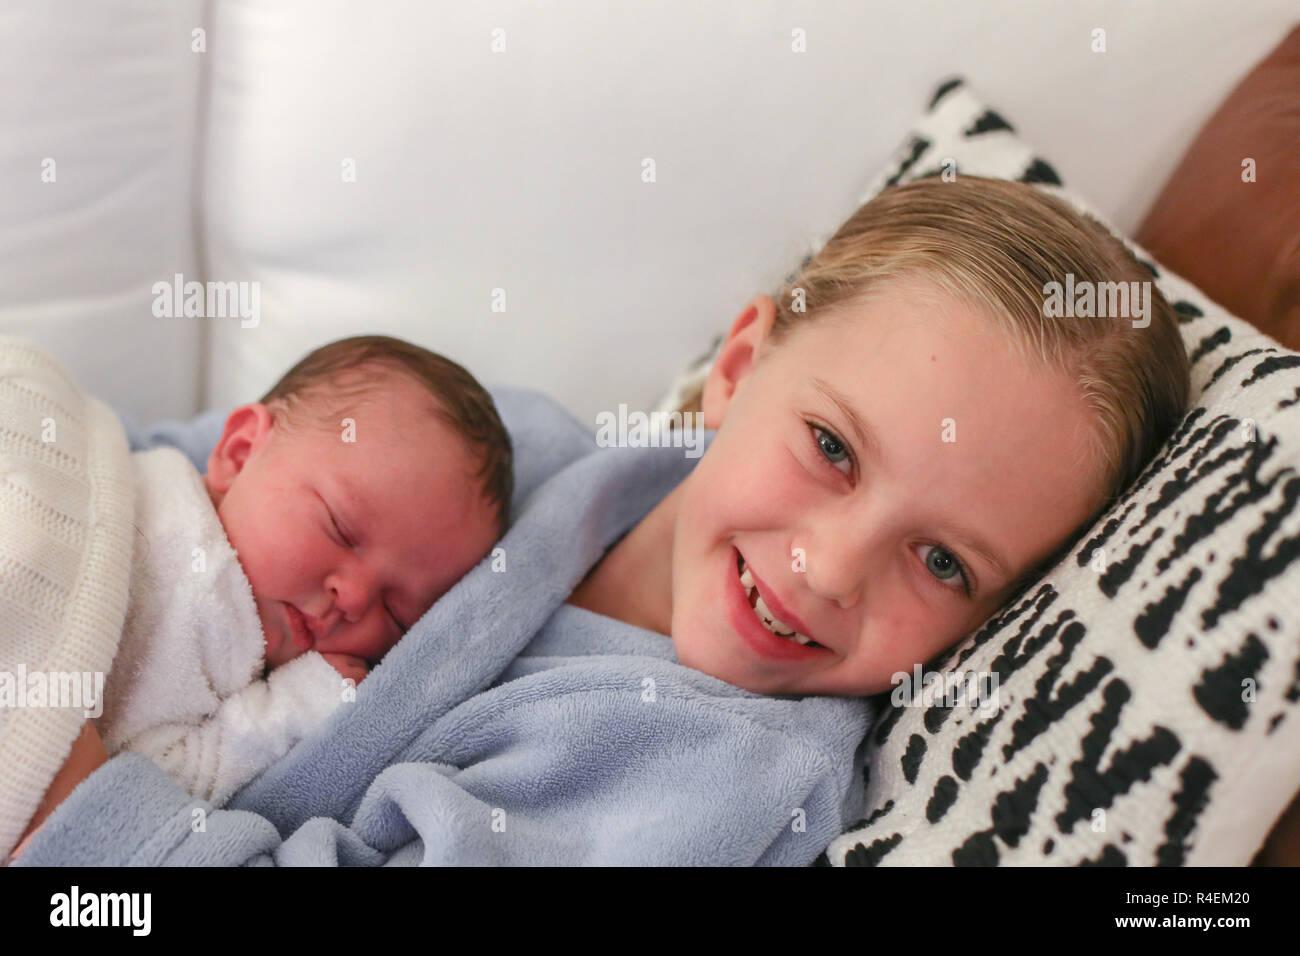 Smiling Girl And Sleeping Baby High Resolution Stock Photography and Images  - Alamy